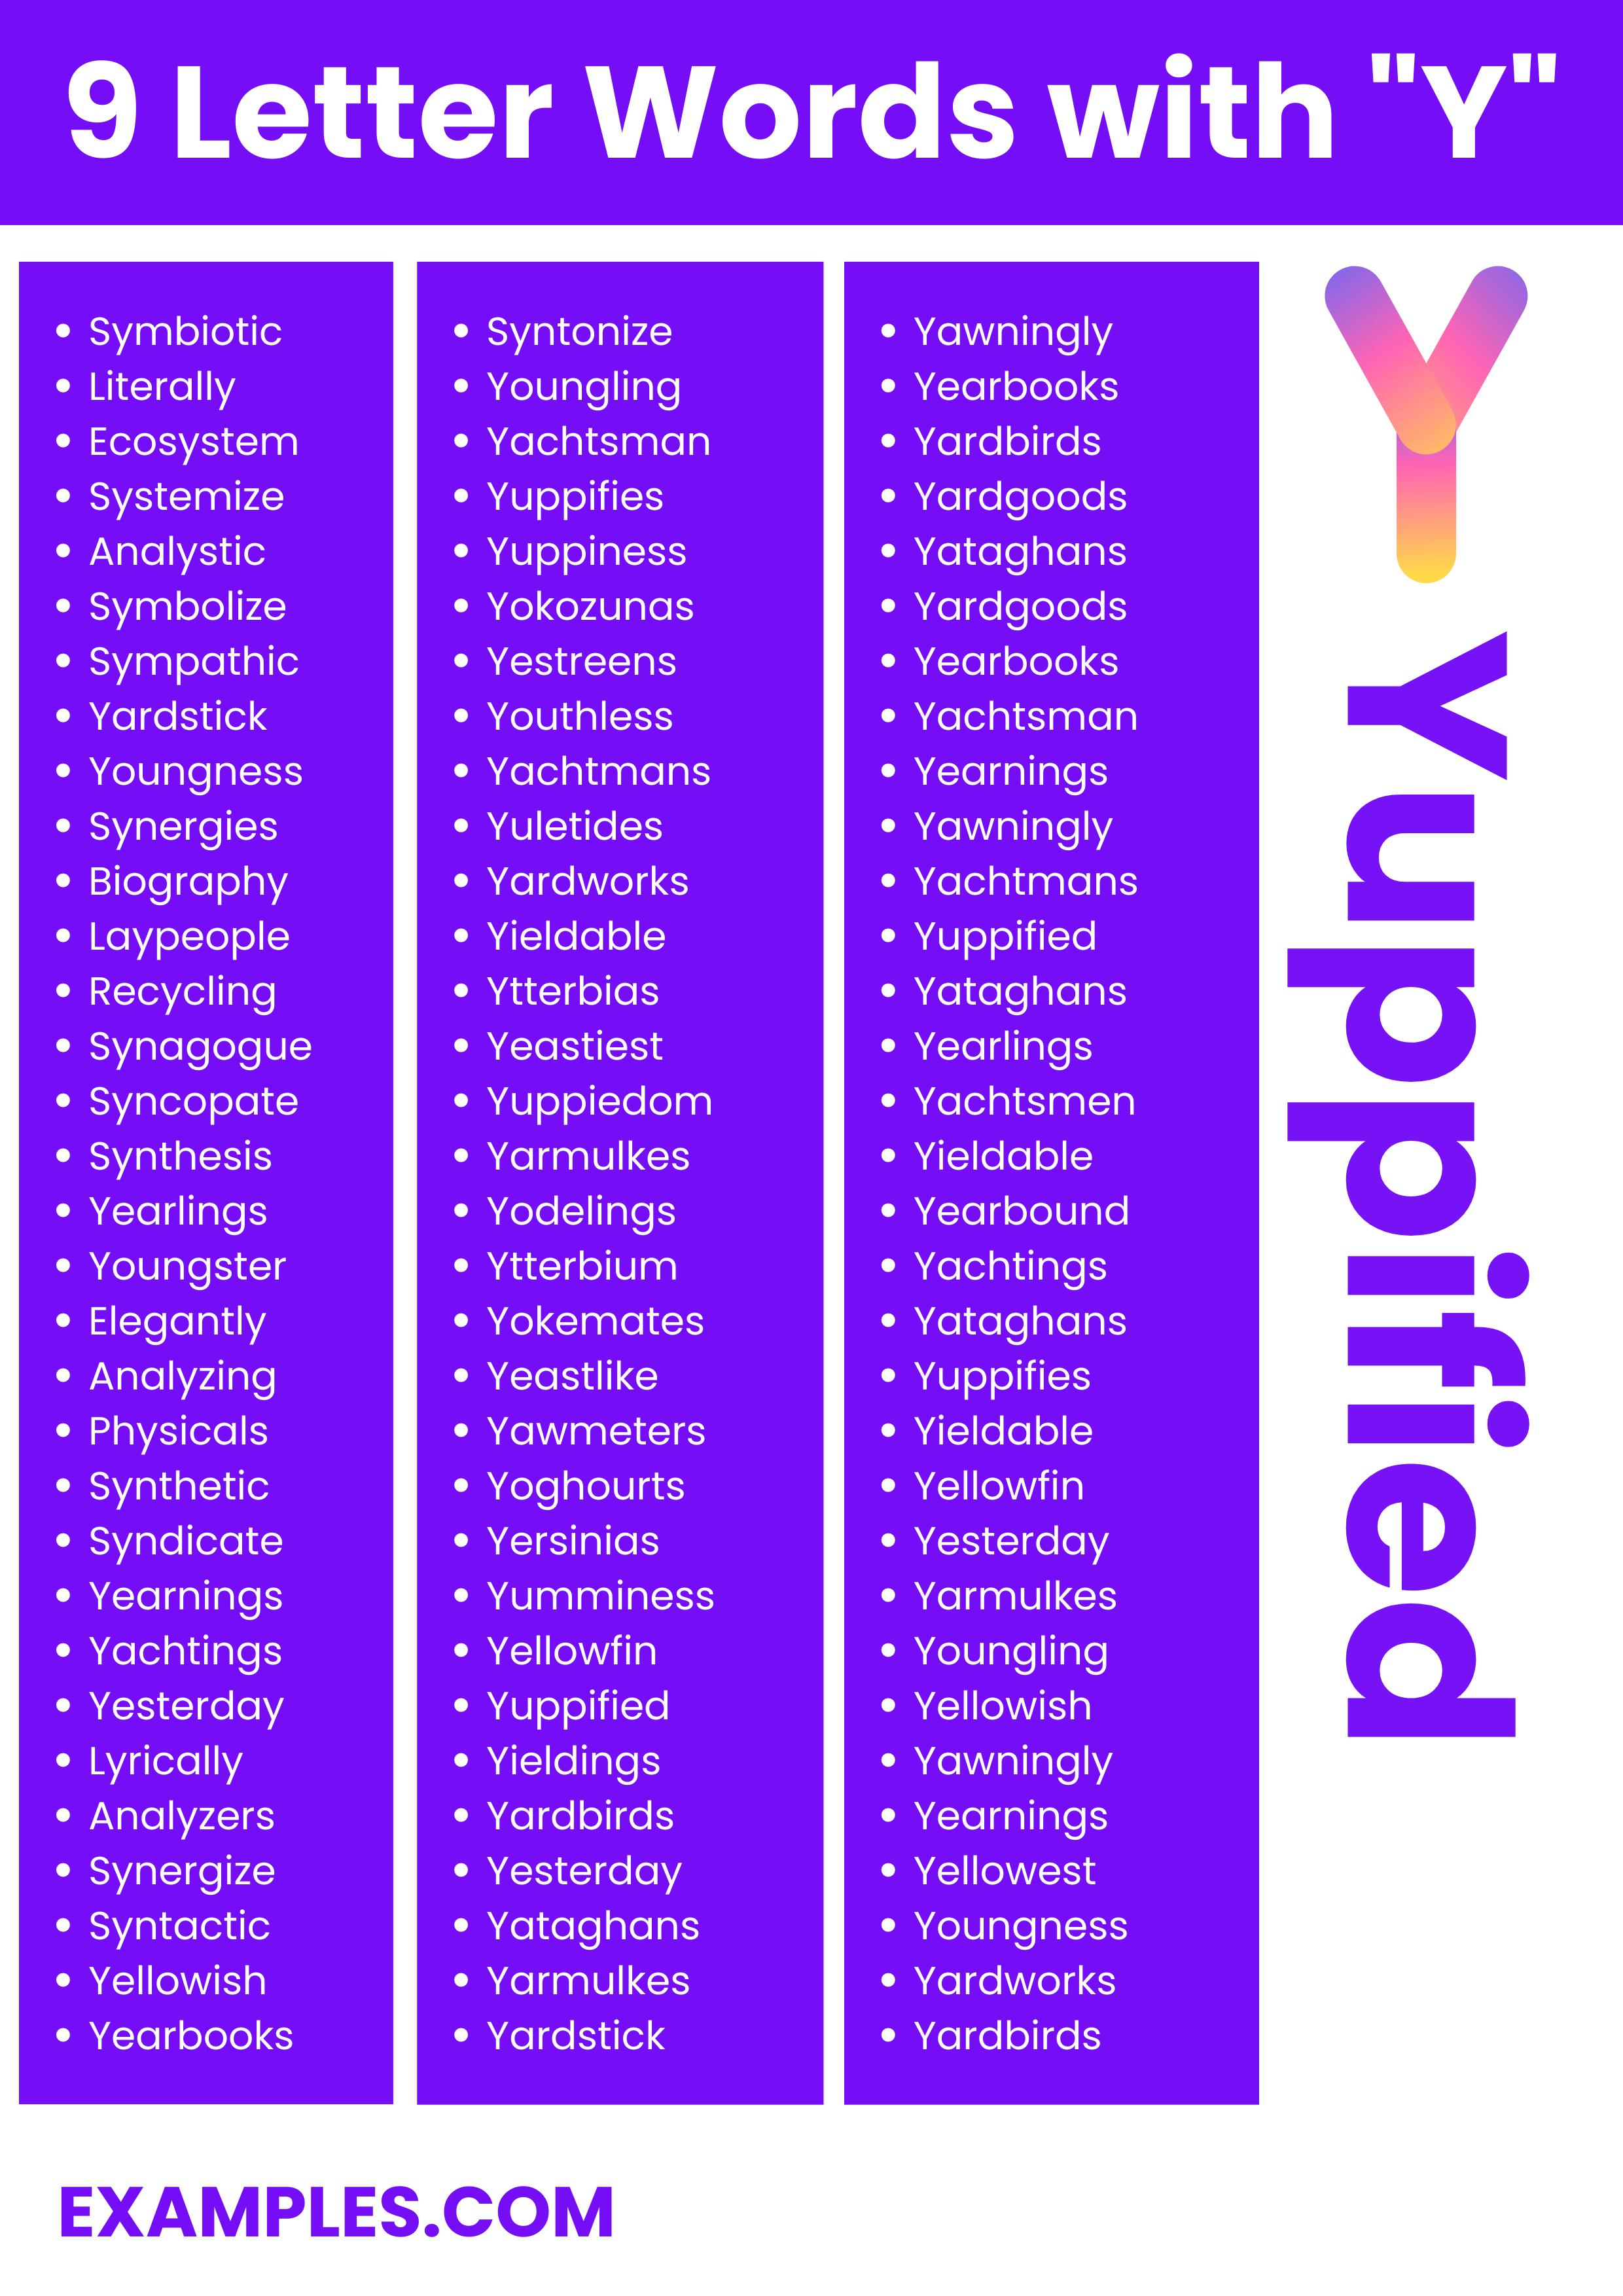 9 letter words with y